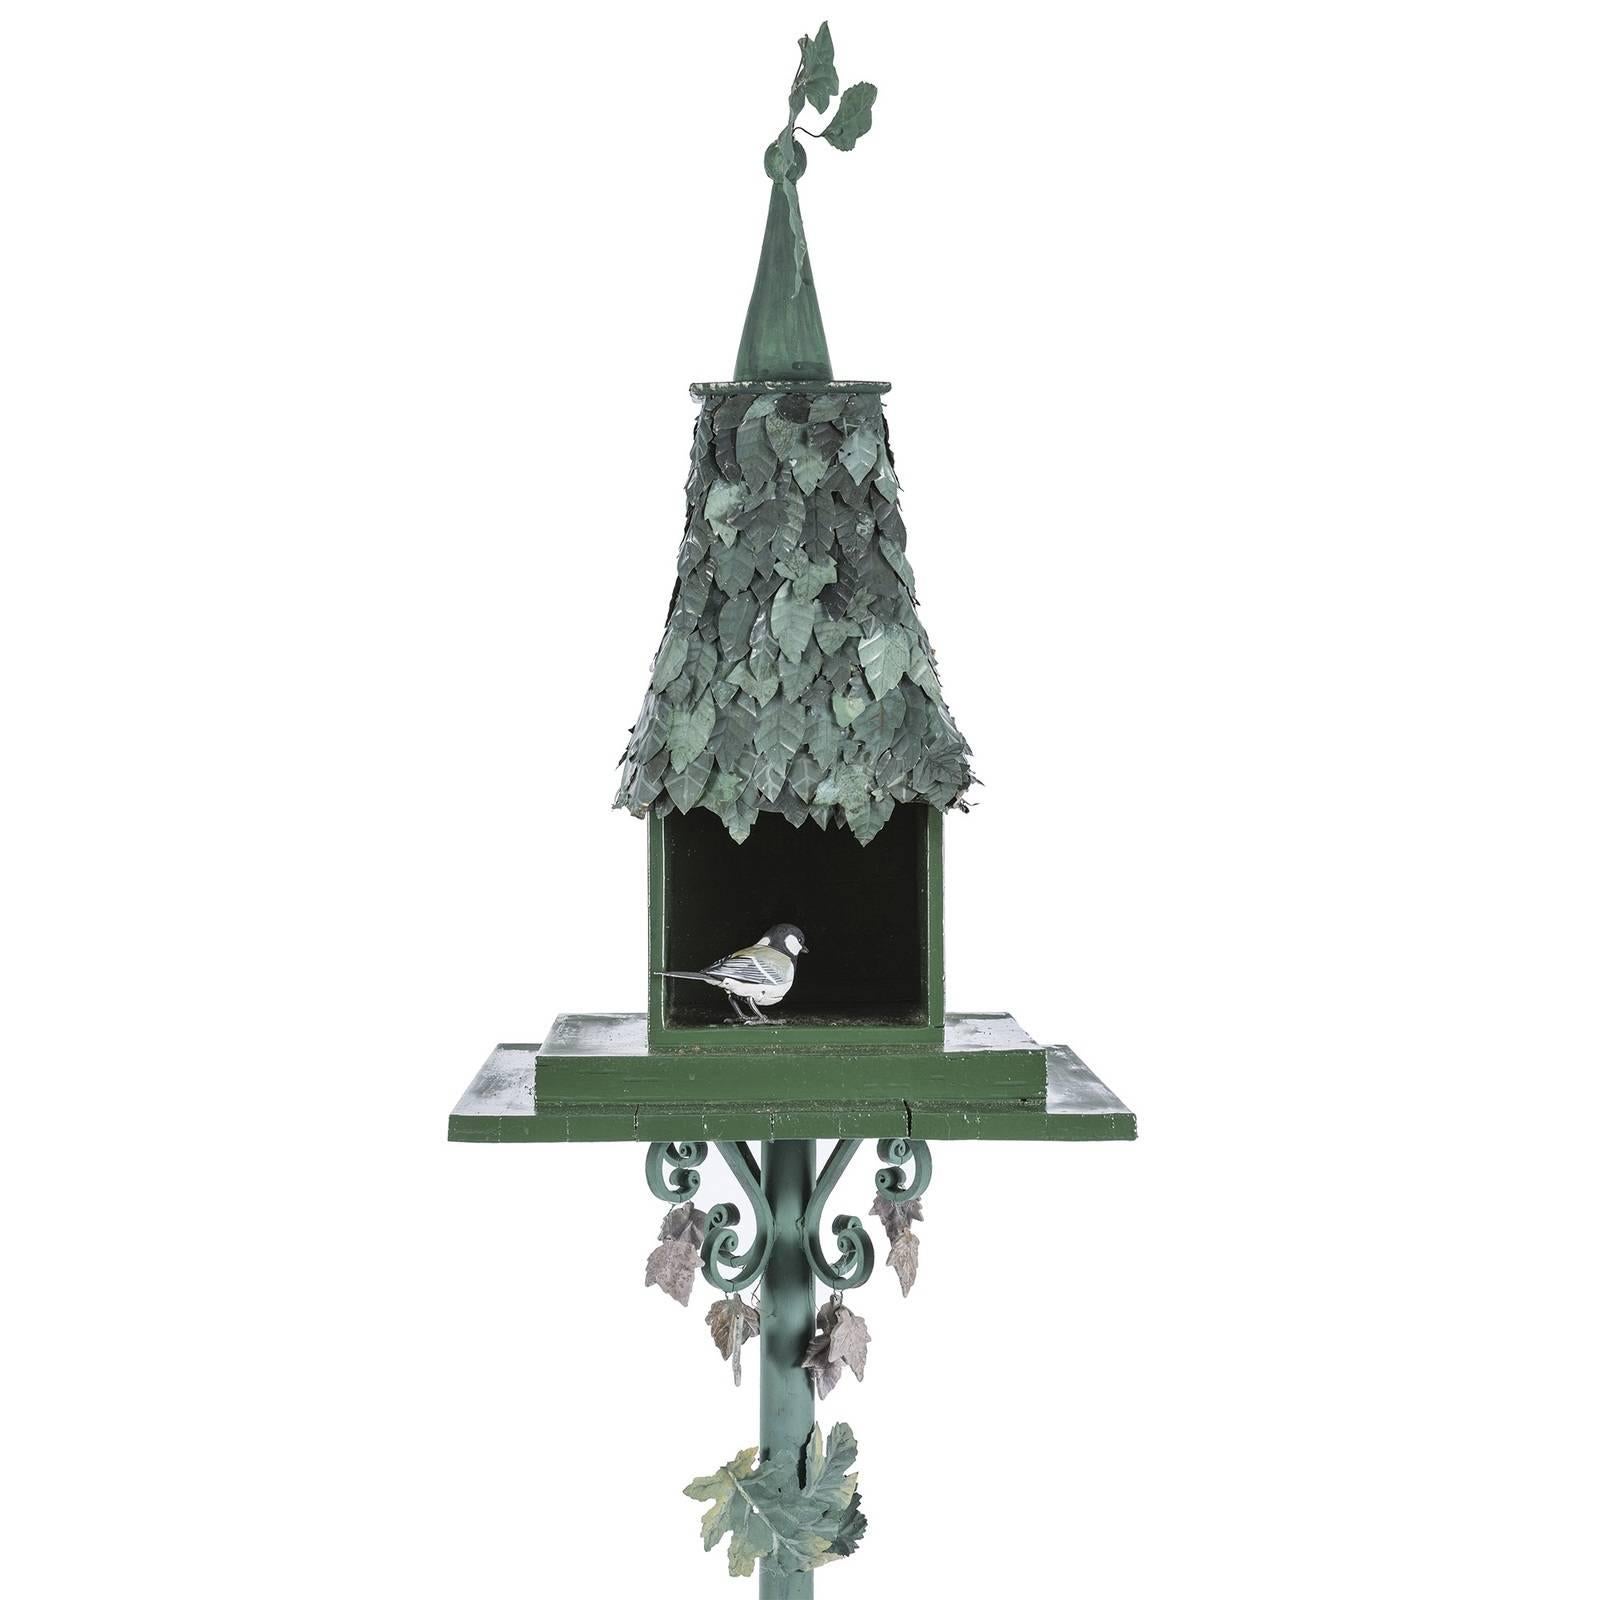 A charming and sophisticated accent to adorn a patio, a veranda, or a balcony, this bird feeder will add a touch that is both rustic and sophisticated to an apartment in the city or a country house. A special item to add to a personal collection, or